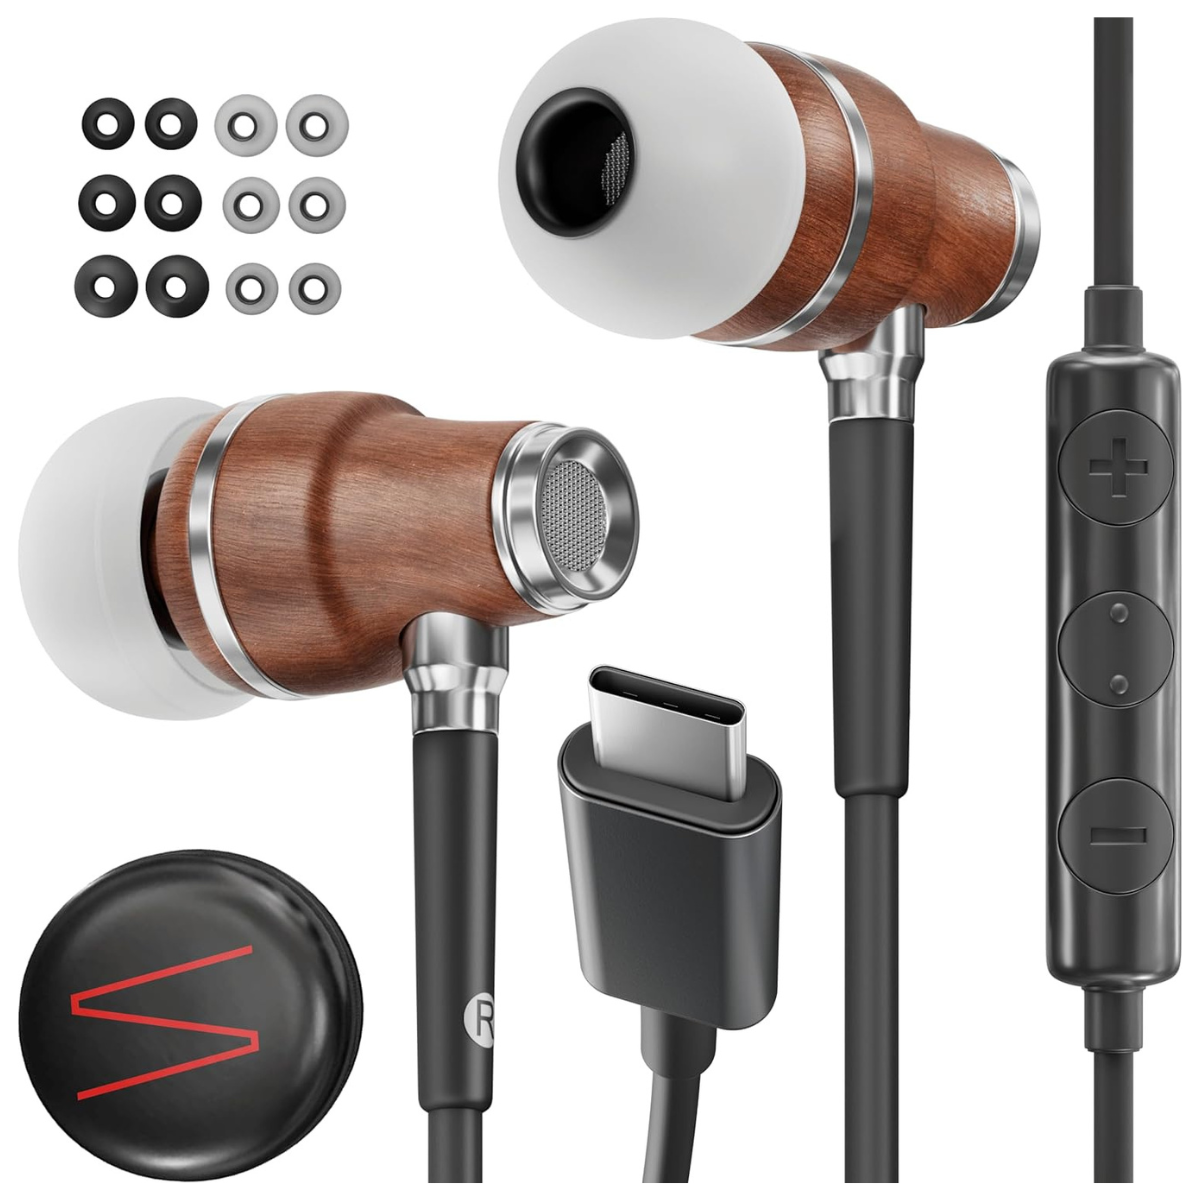 The Symphonized Wooden USB-C Earbuds